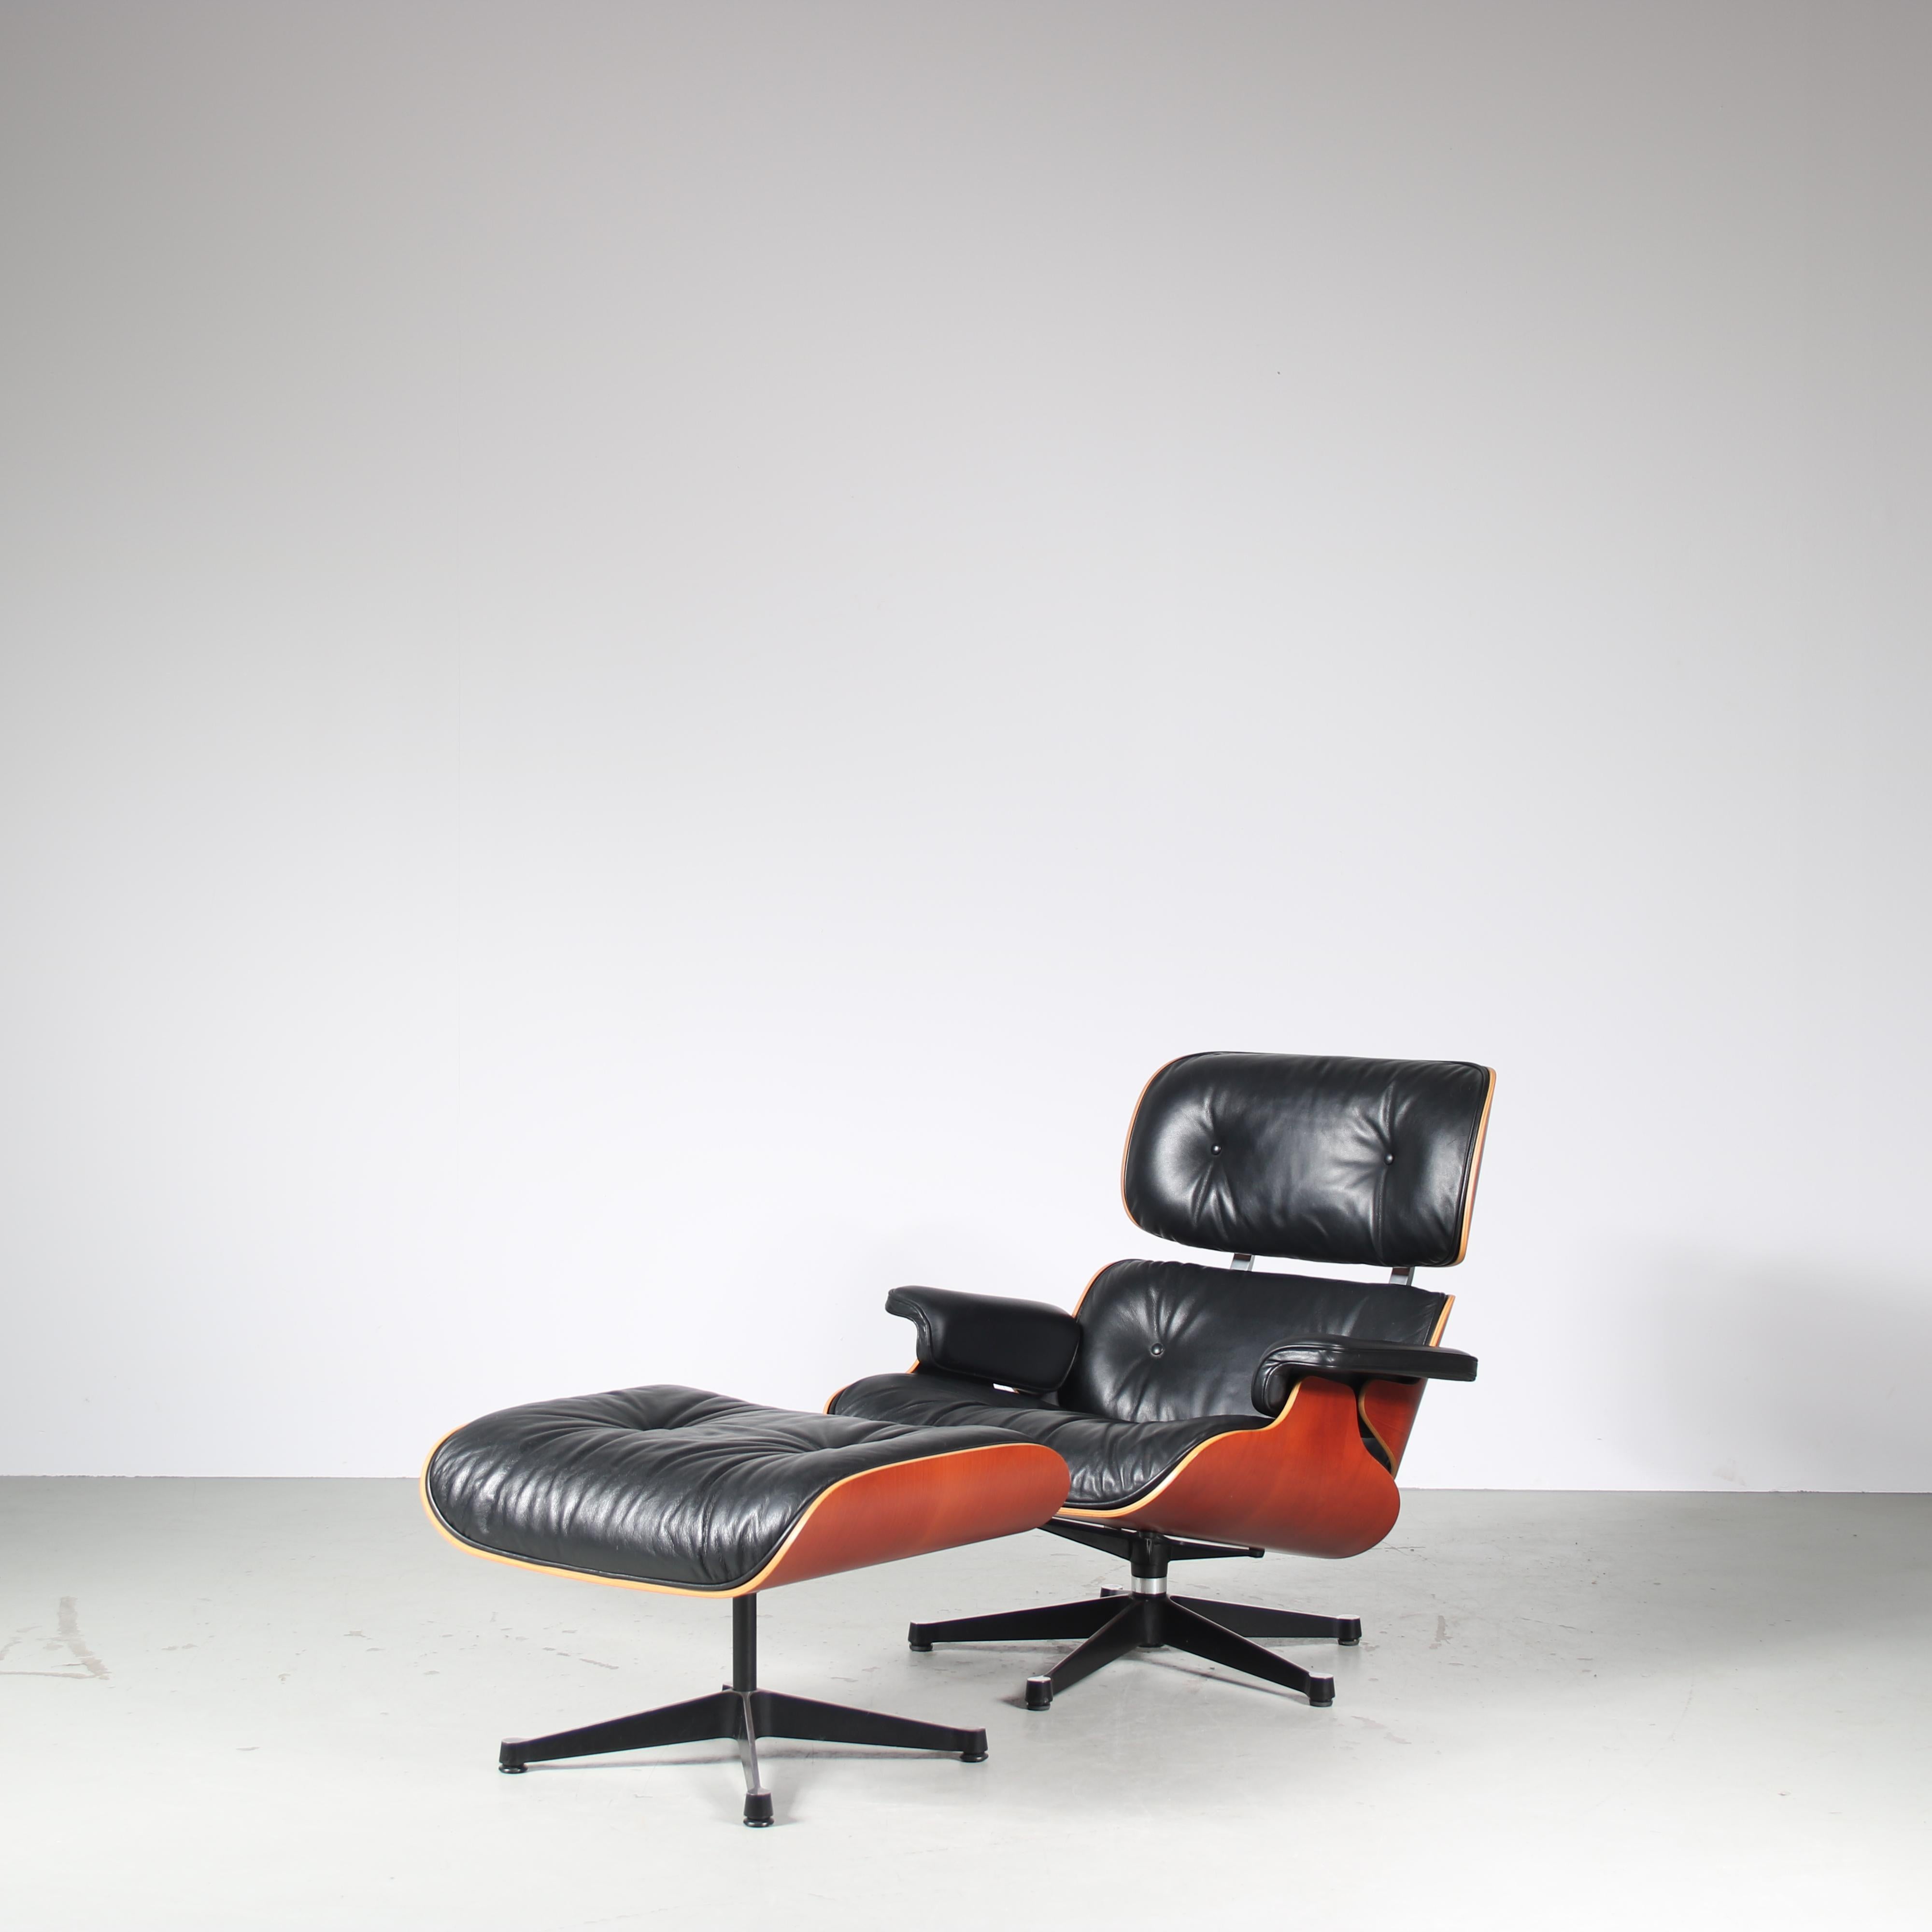 

The iconic lounge chair with ottoman, designed by Charles & Ray Eames and manufactured by Vitra in Germany around 2004.

It is a true masterpiece of design. Its iconic cherry wooden shells provide an incredibly stylish and comfortable seating